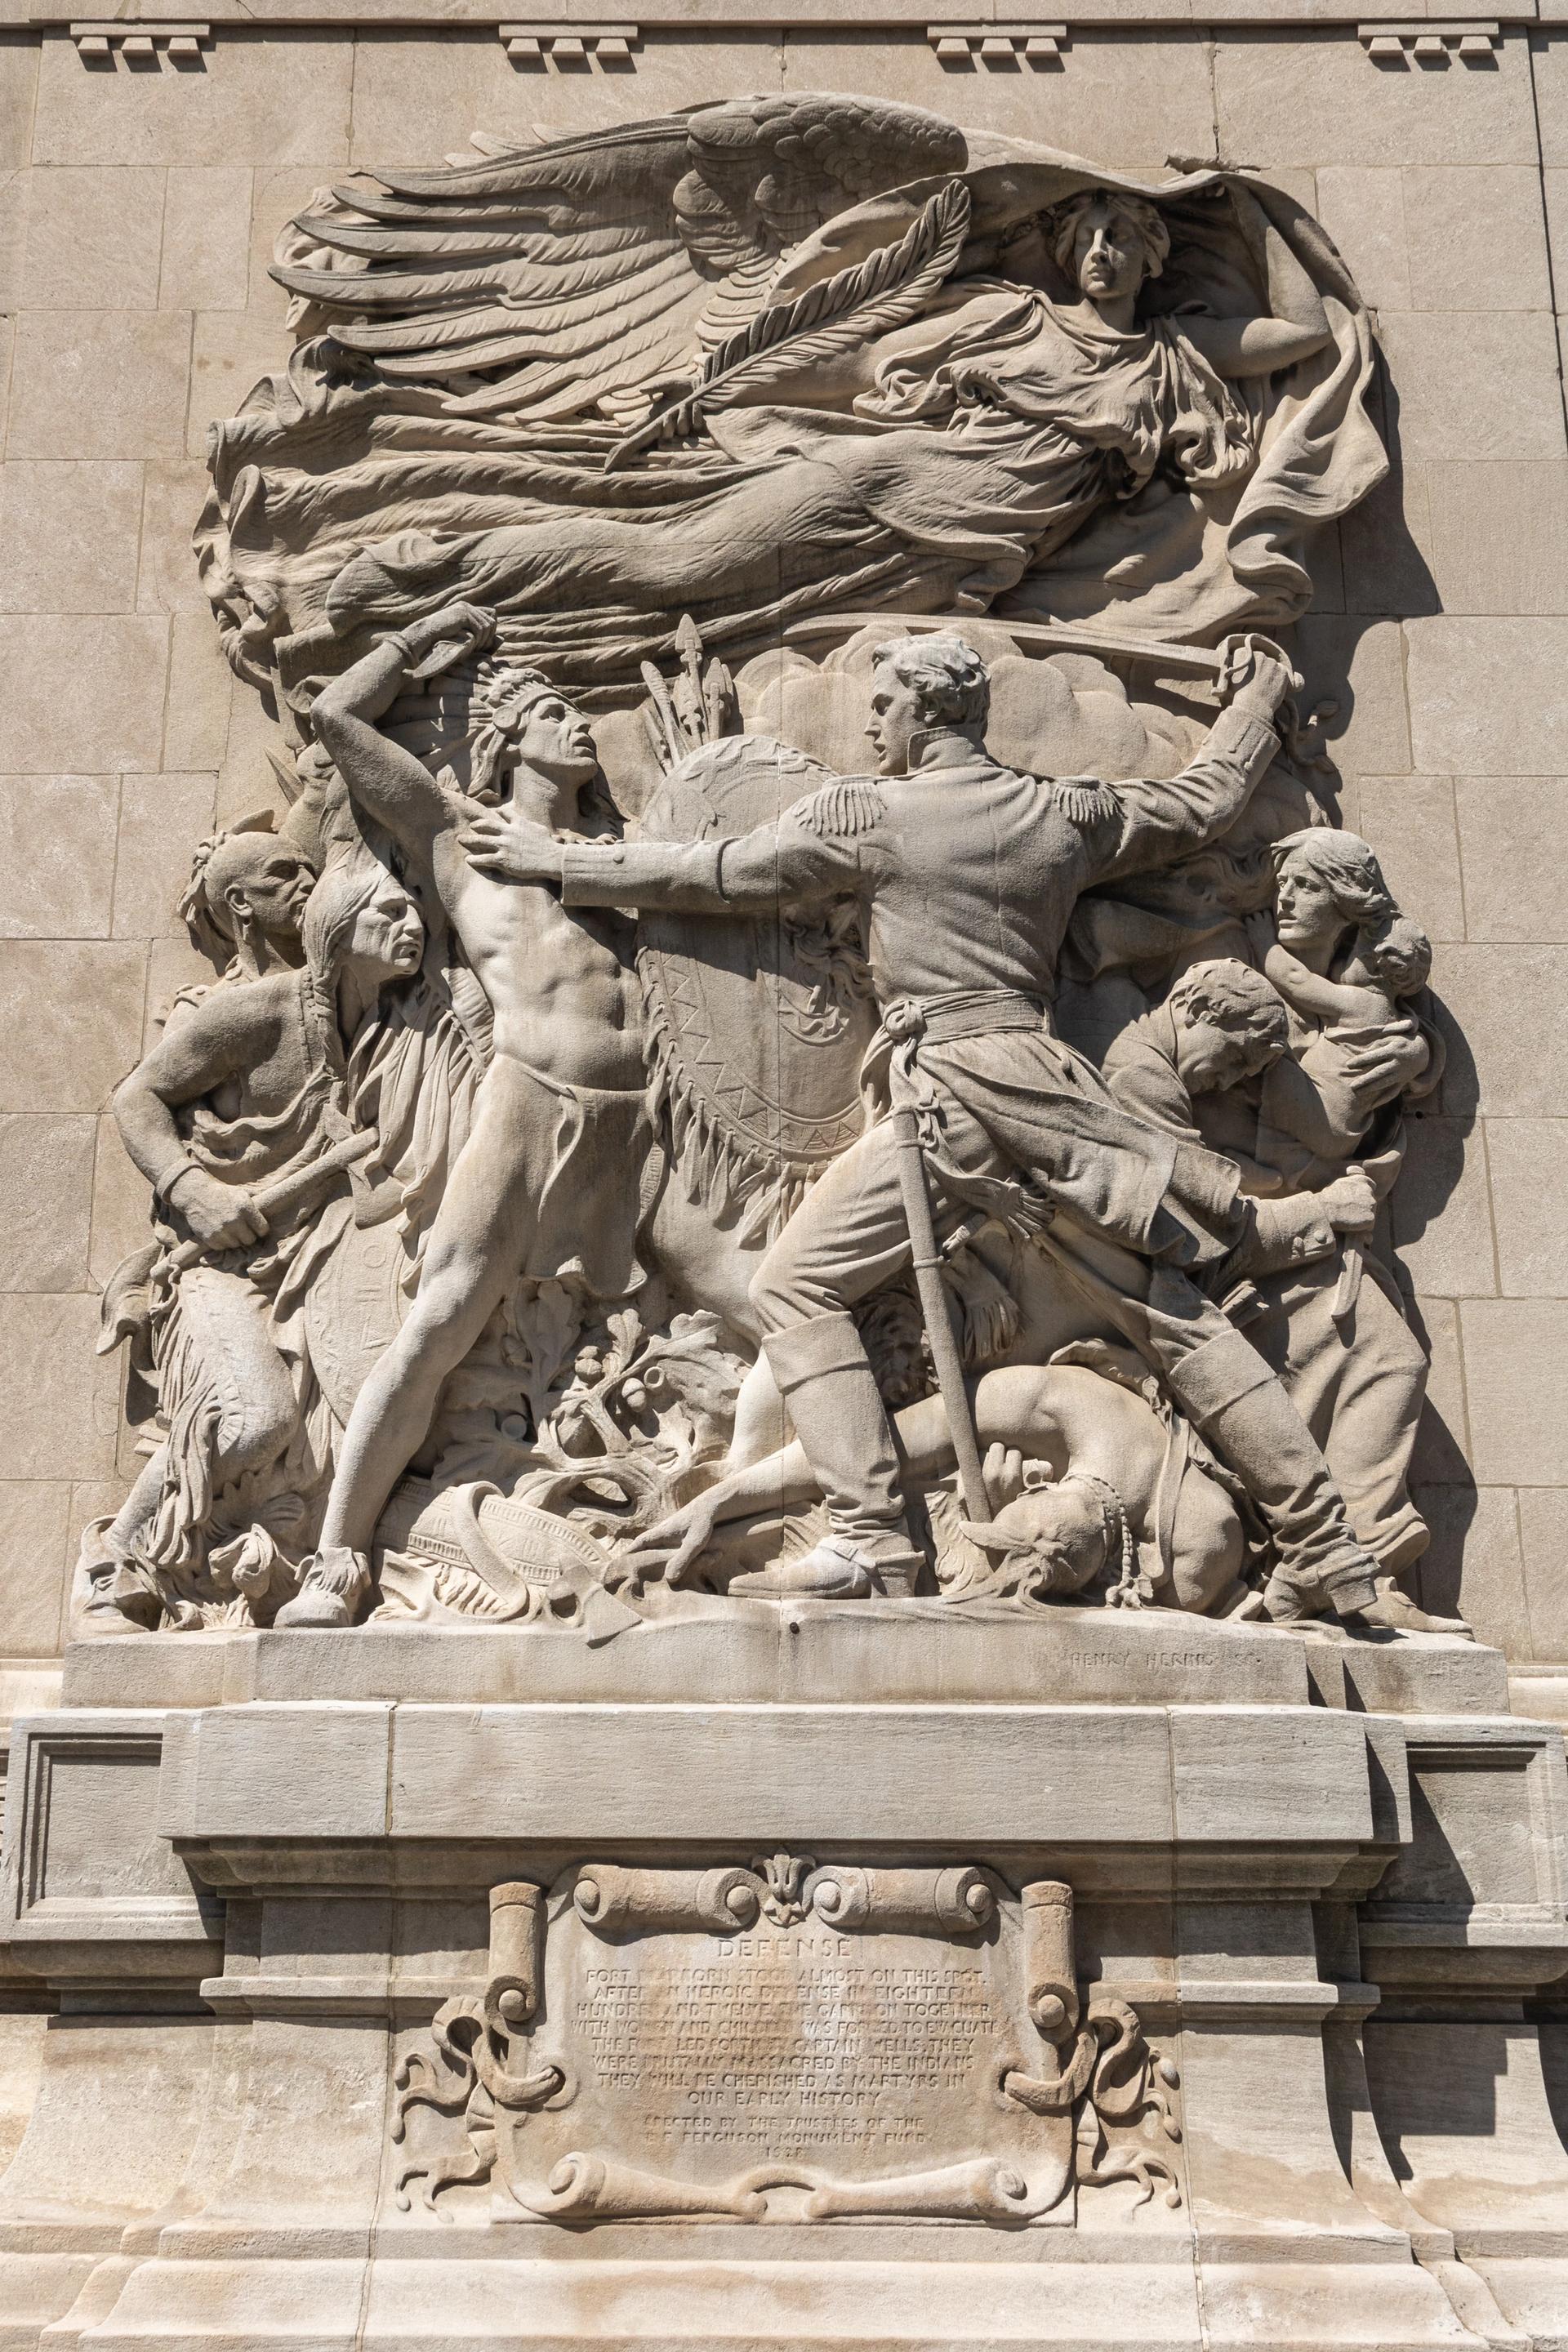 Henry Hering's The Defense (1928) on DuSable Bridge is among the monuments flagged by the committee 